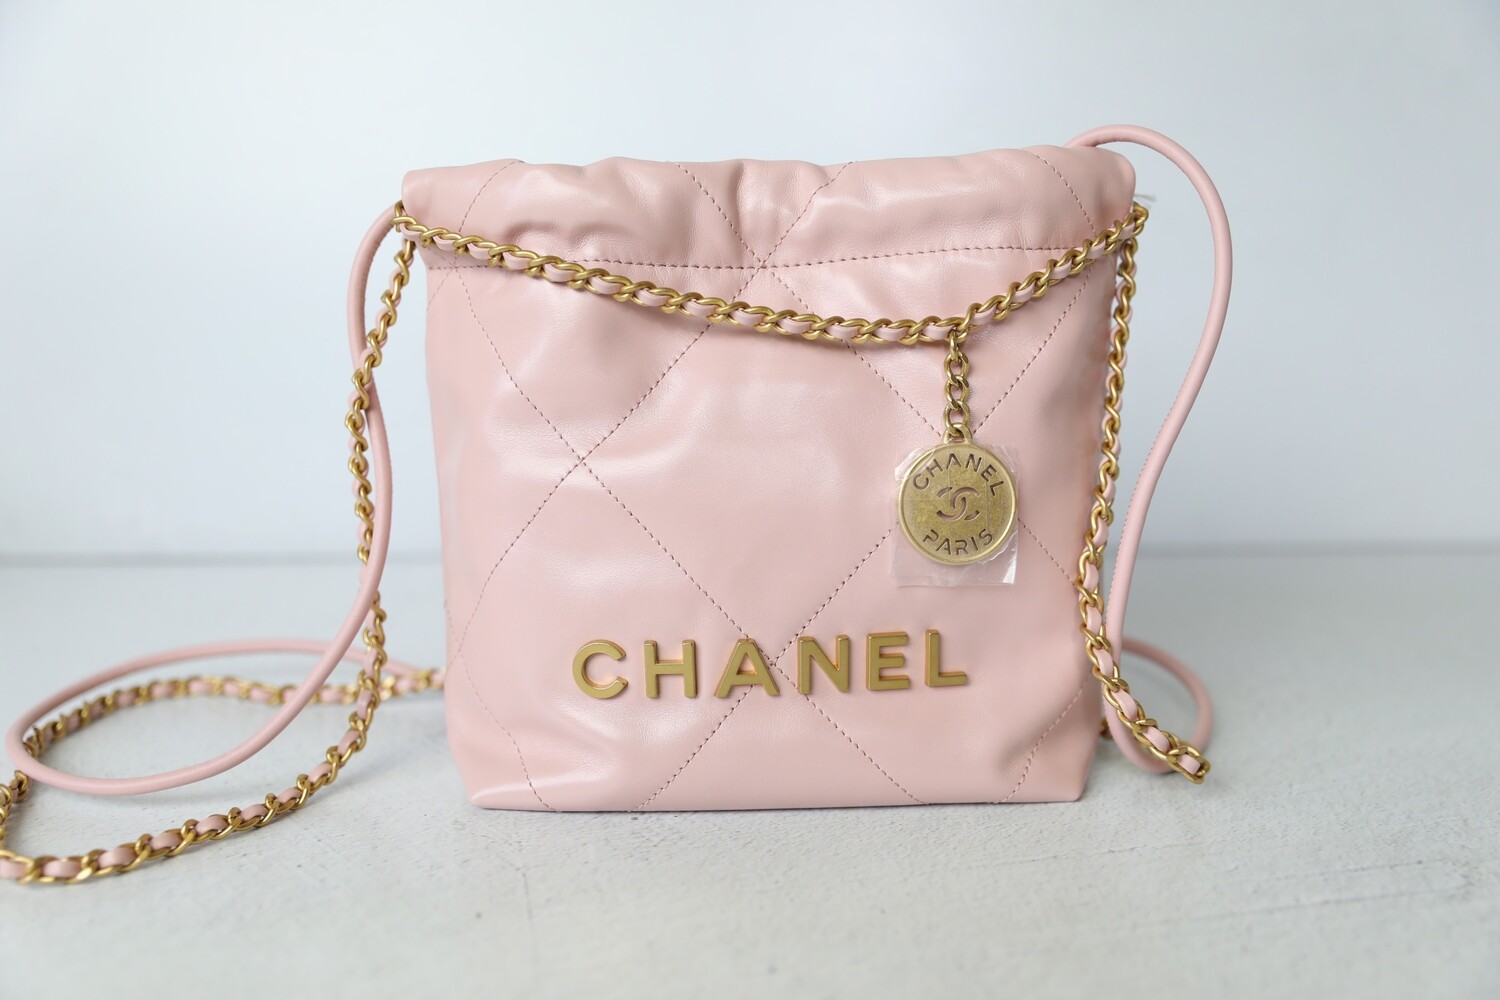 how much is the chanel 22 bag